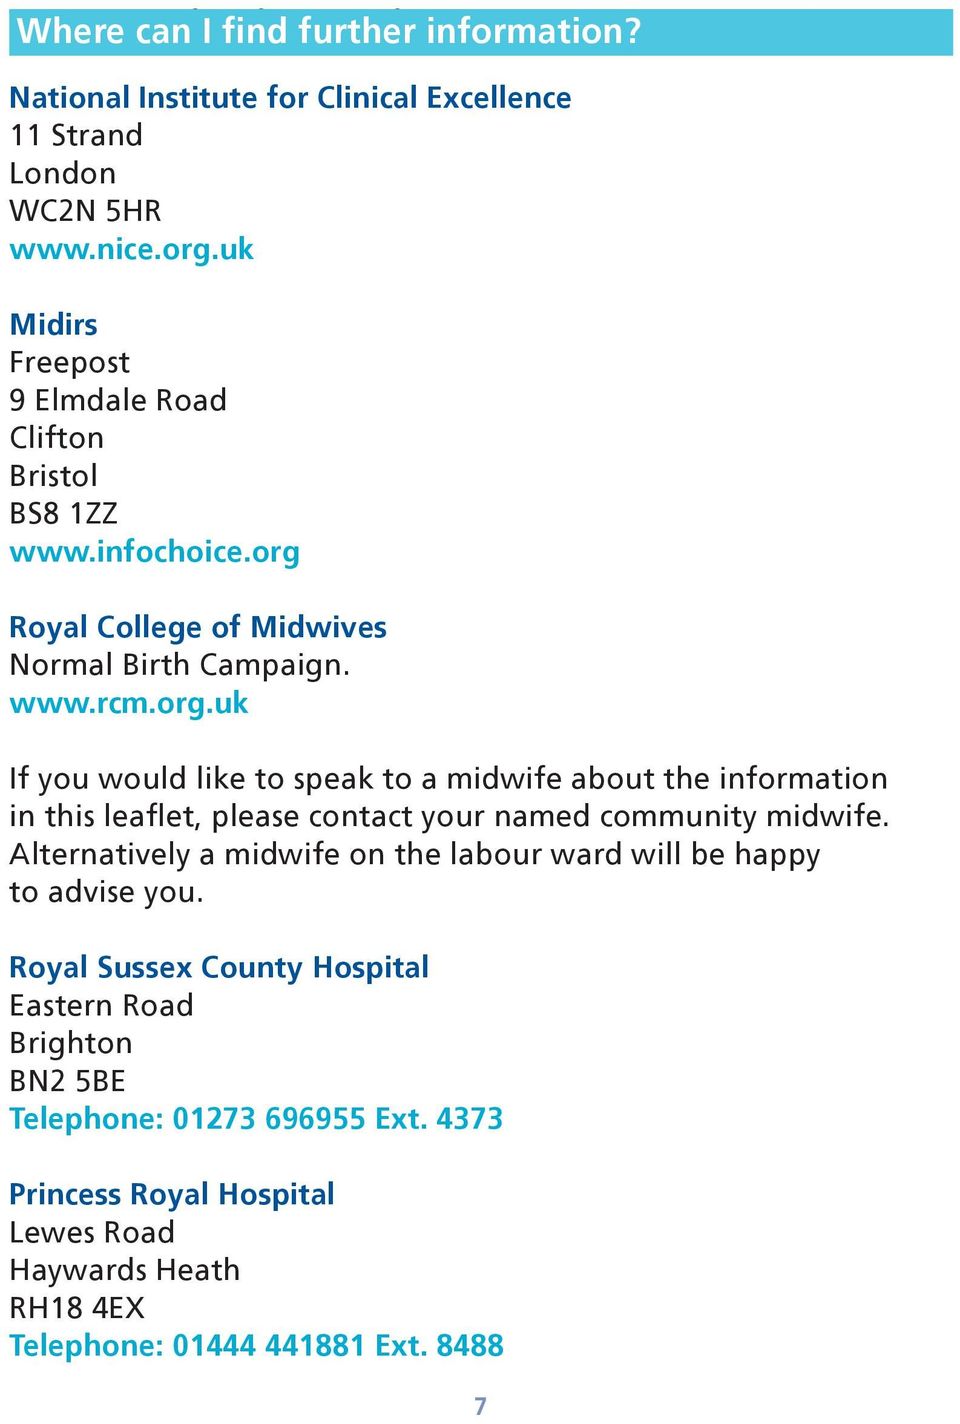 Royal College of Midwives Normal Birth Campaign. www.rcm.org.